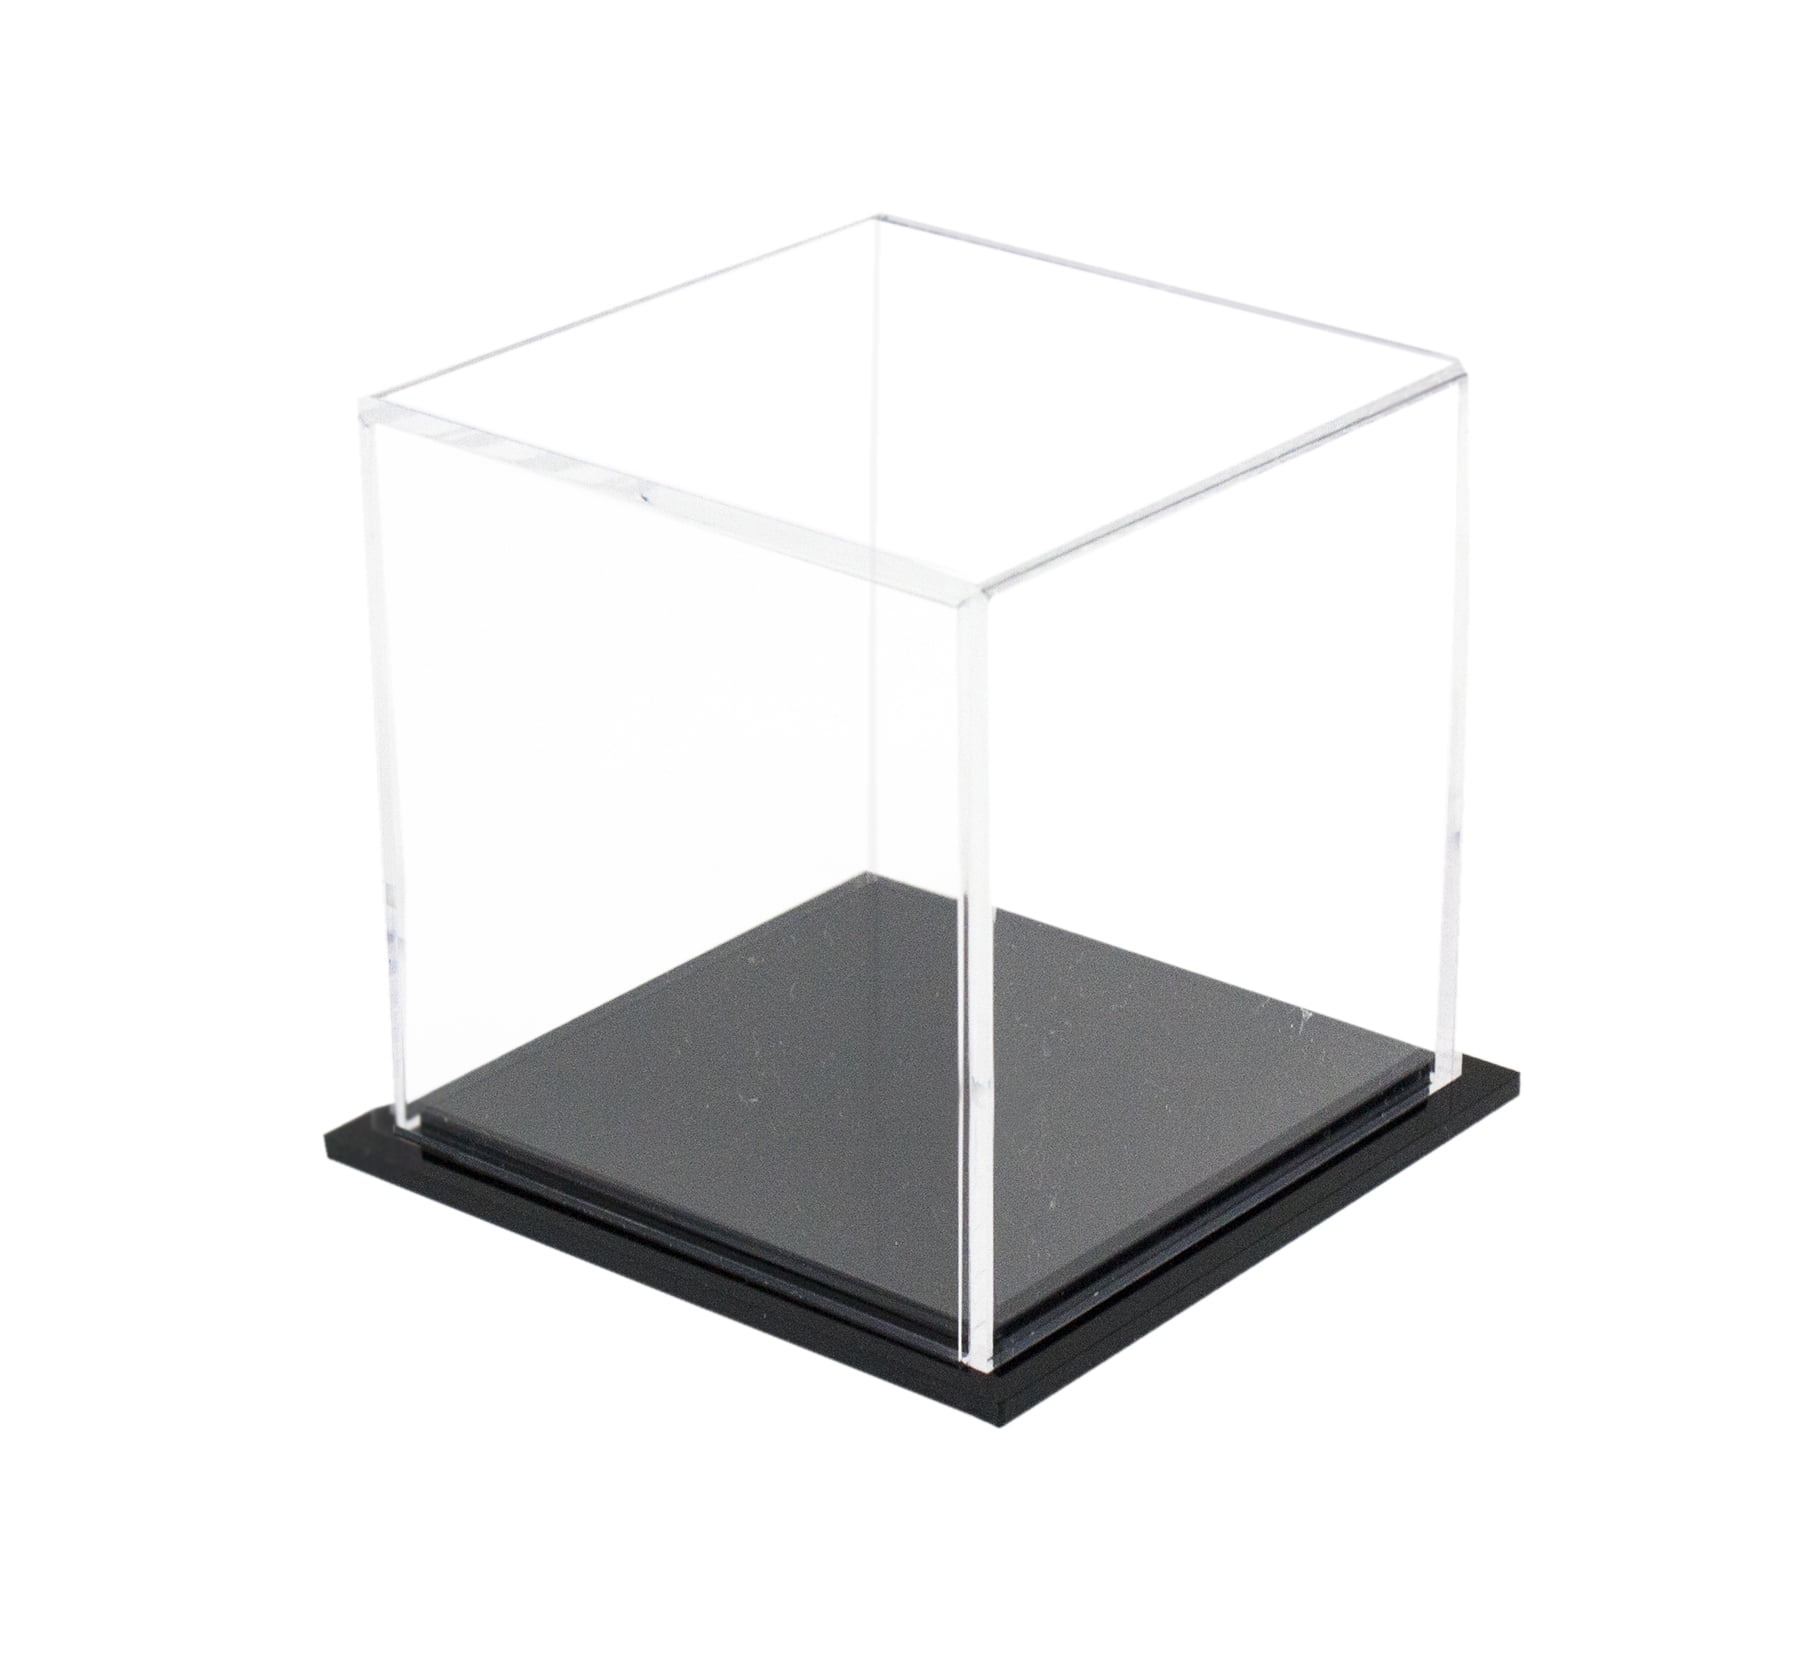 Acrylic Cube Riser 12" x 12" x 19" Displays Cases Collectibles Dolls 5s-121219 